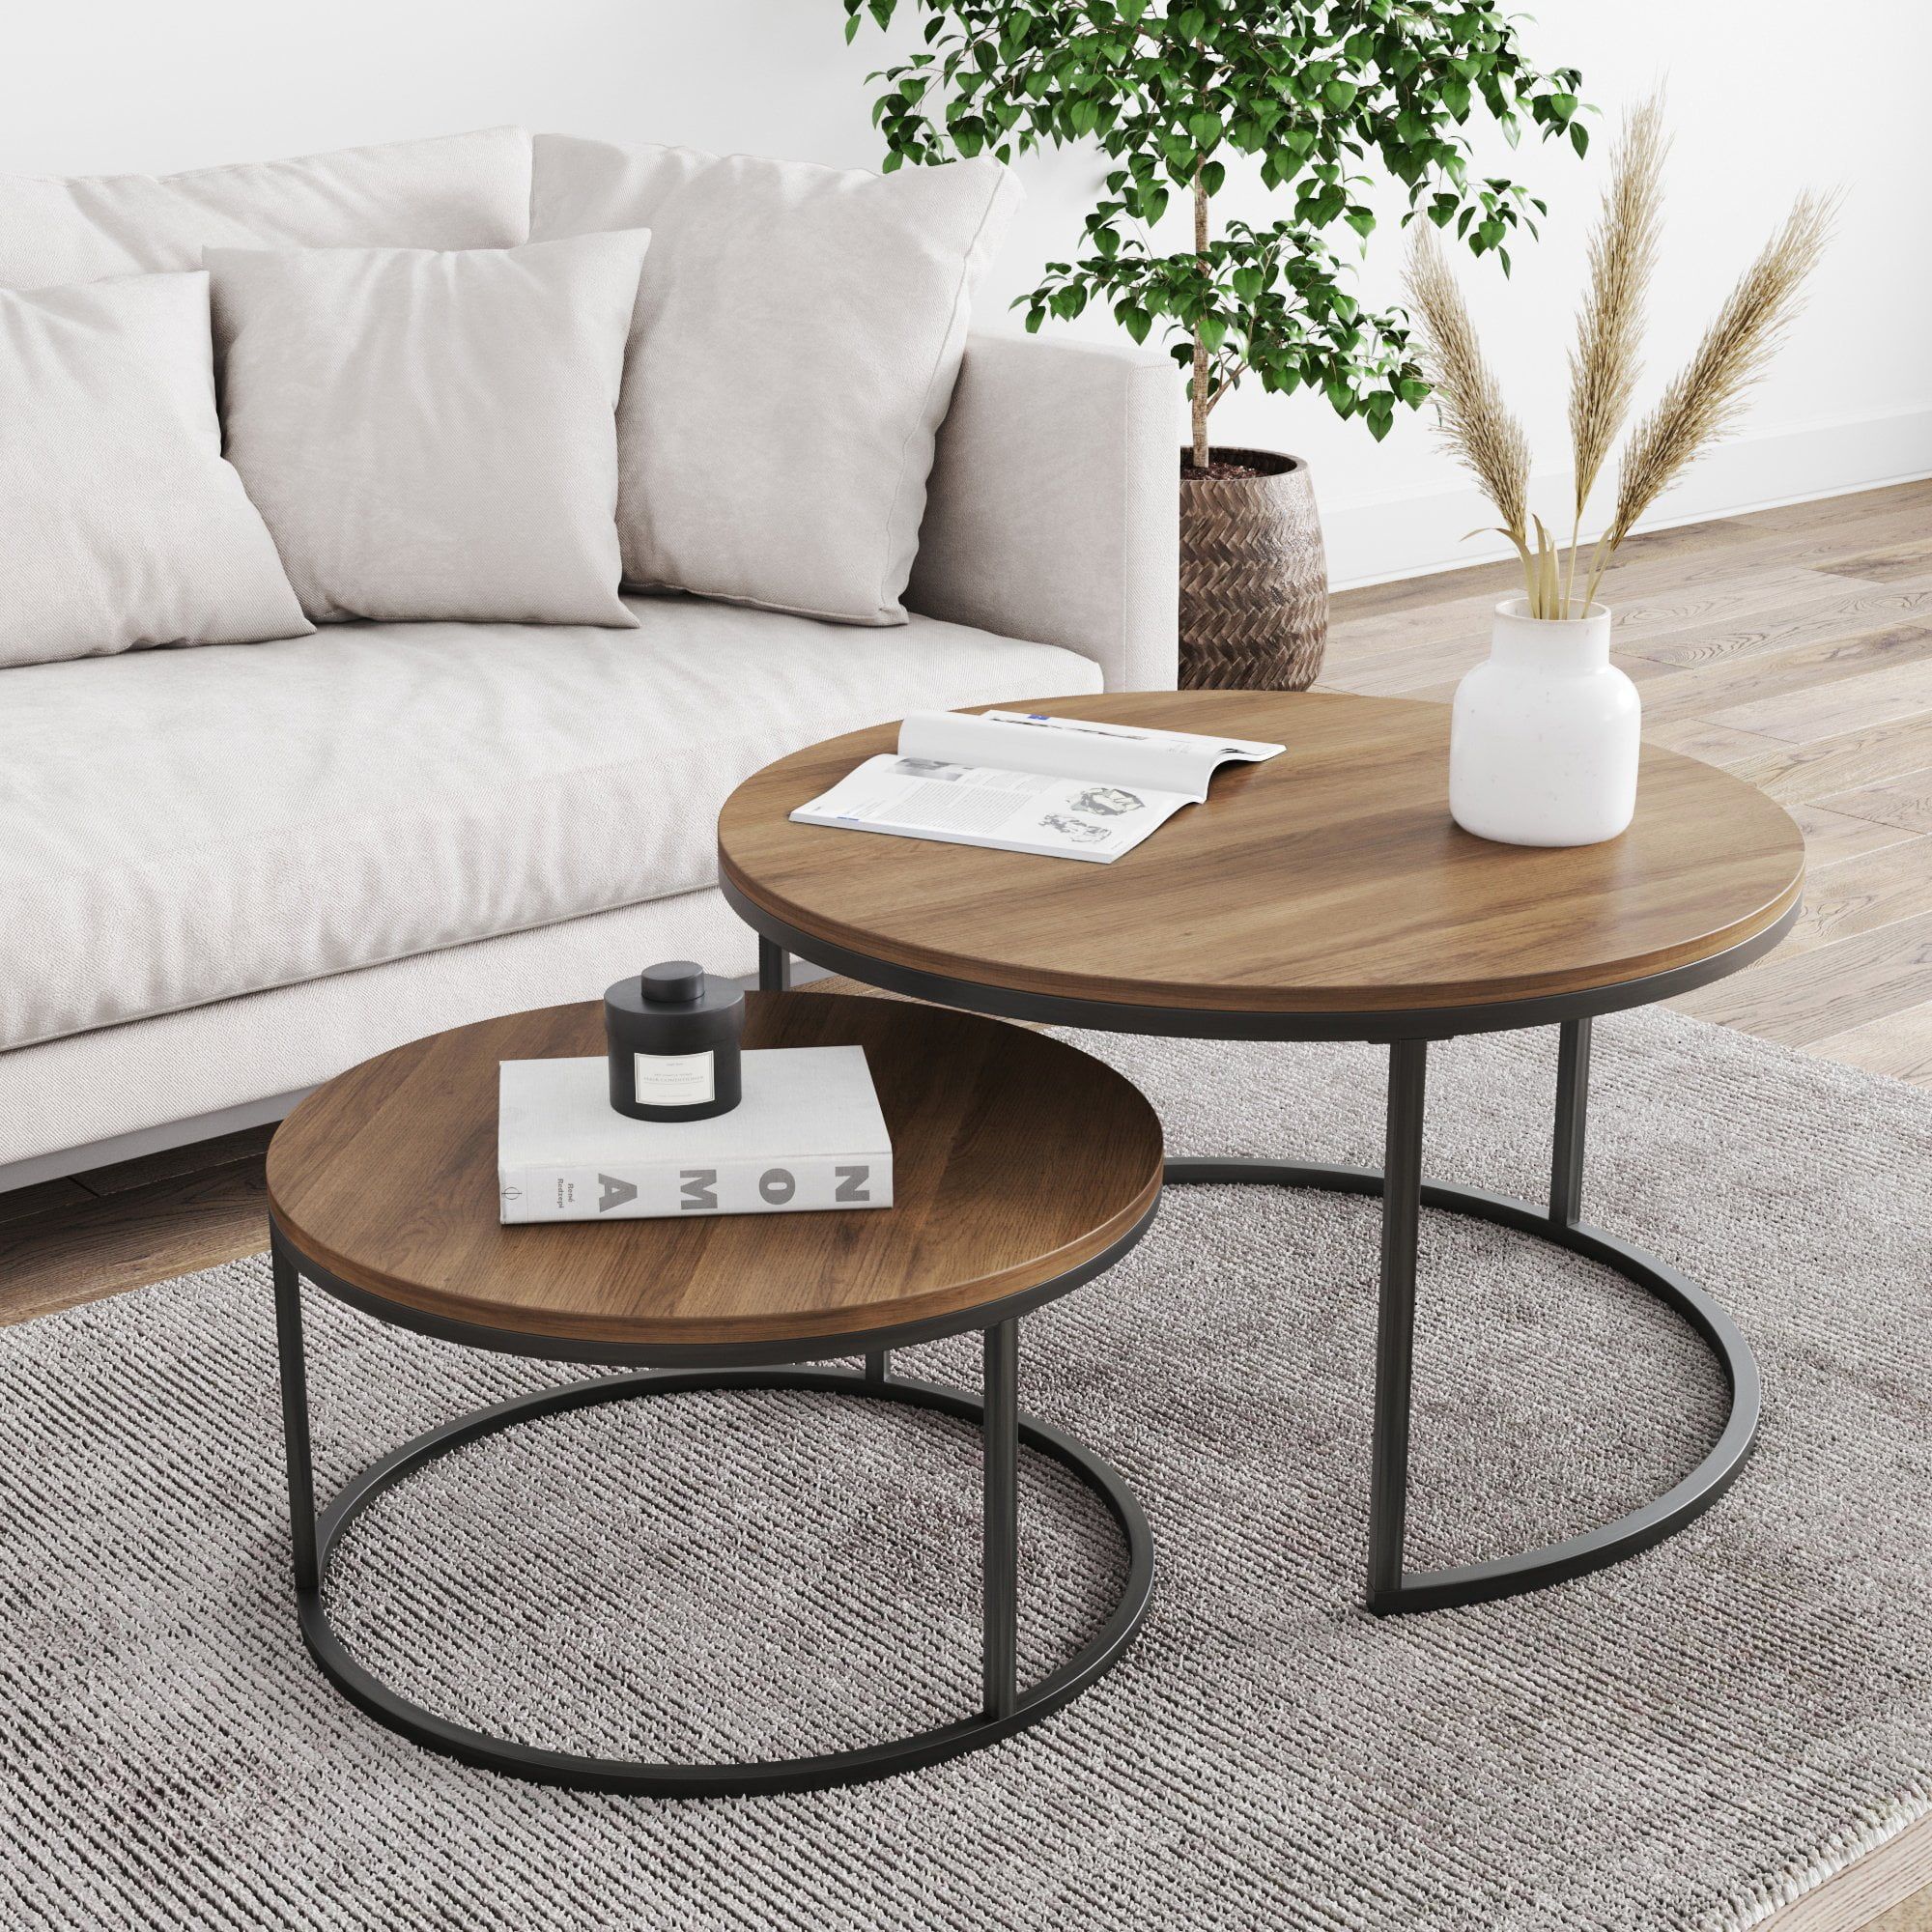 Nathan James Stella Round Modern Nesting Coffee Table Set Of 2, Stacking  Living Room Accent Cocktail Tables With An Industrial Wood Finish And  Powder Coated Metal Frame, Reclaimed Oak/black – Walmart Throughout Modern Nesting Coffee Tables (View 5 of 15)